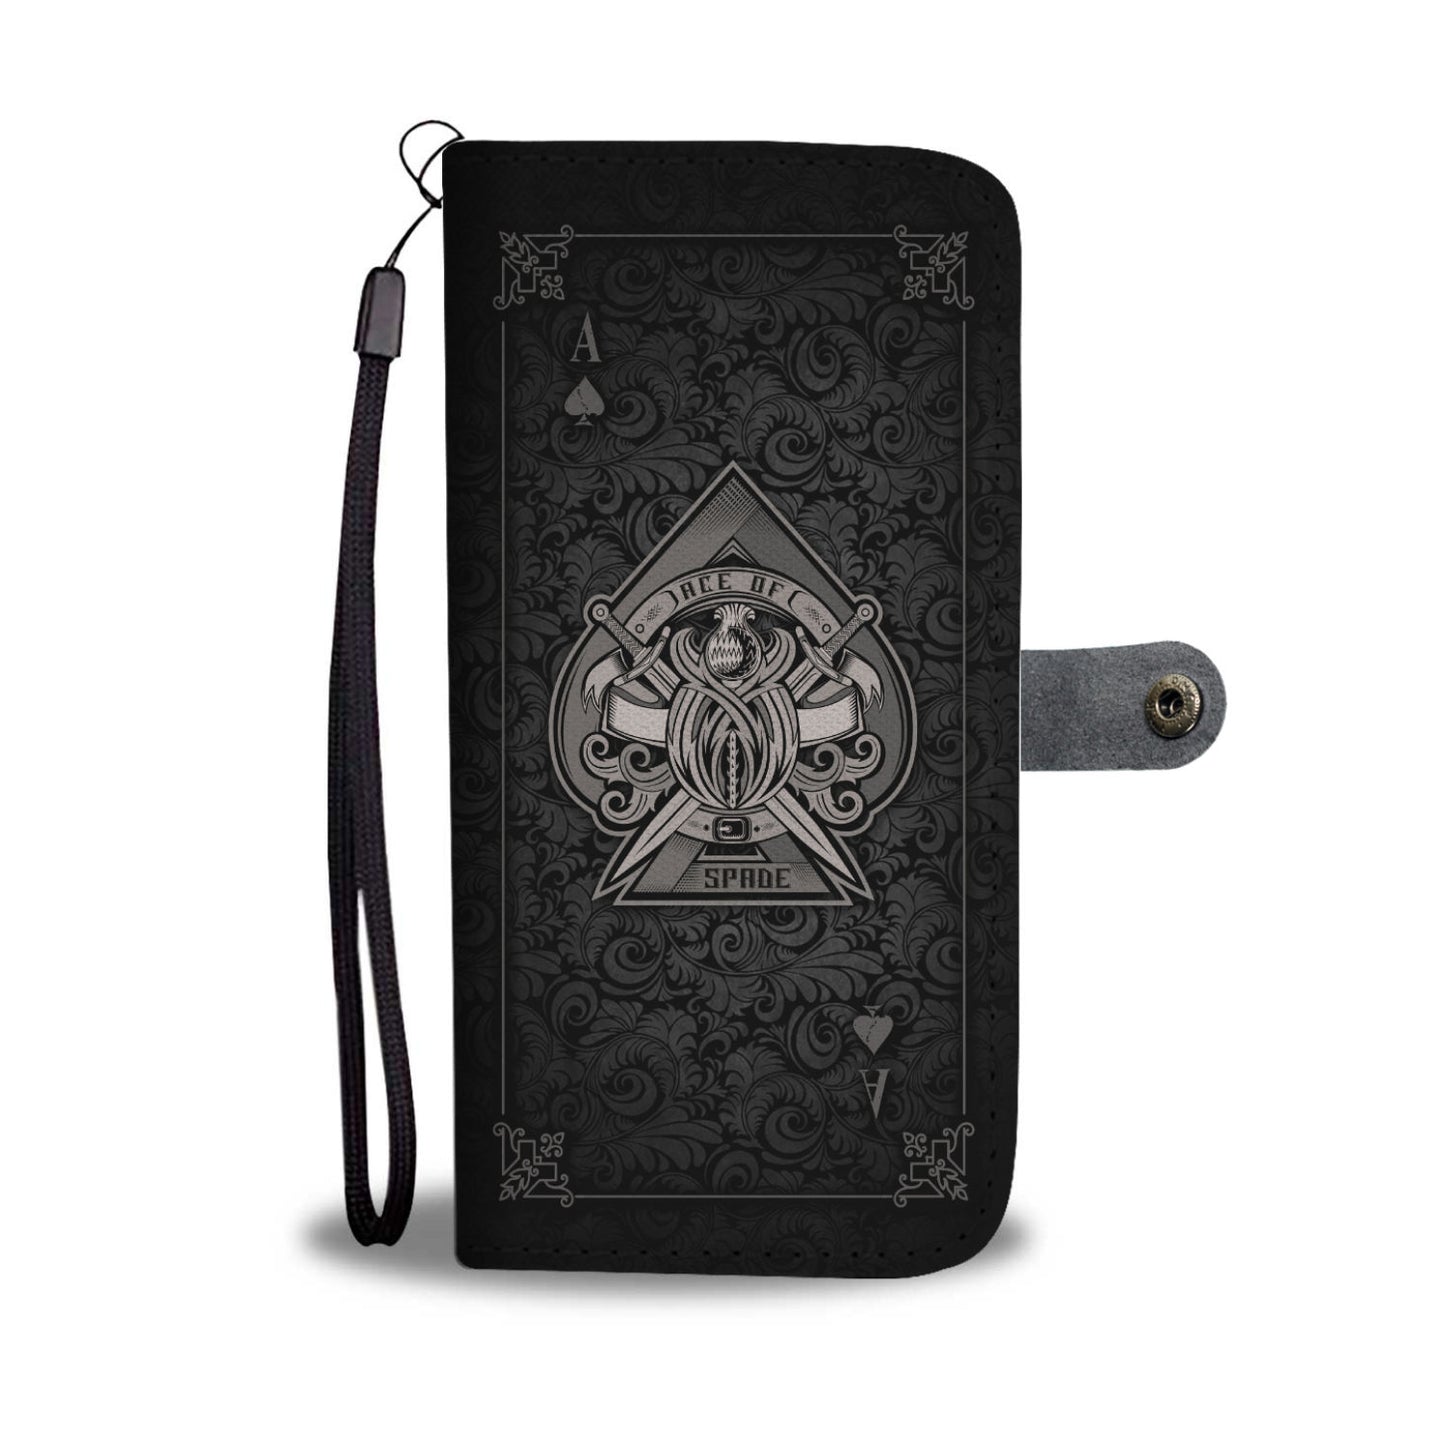 Ace of Spades Phone Wallet Case